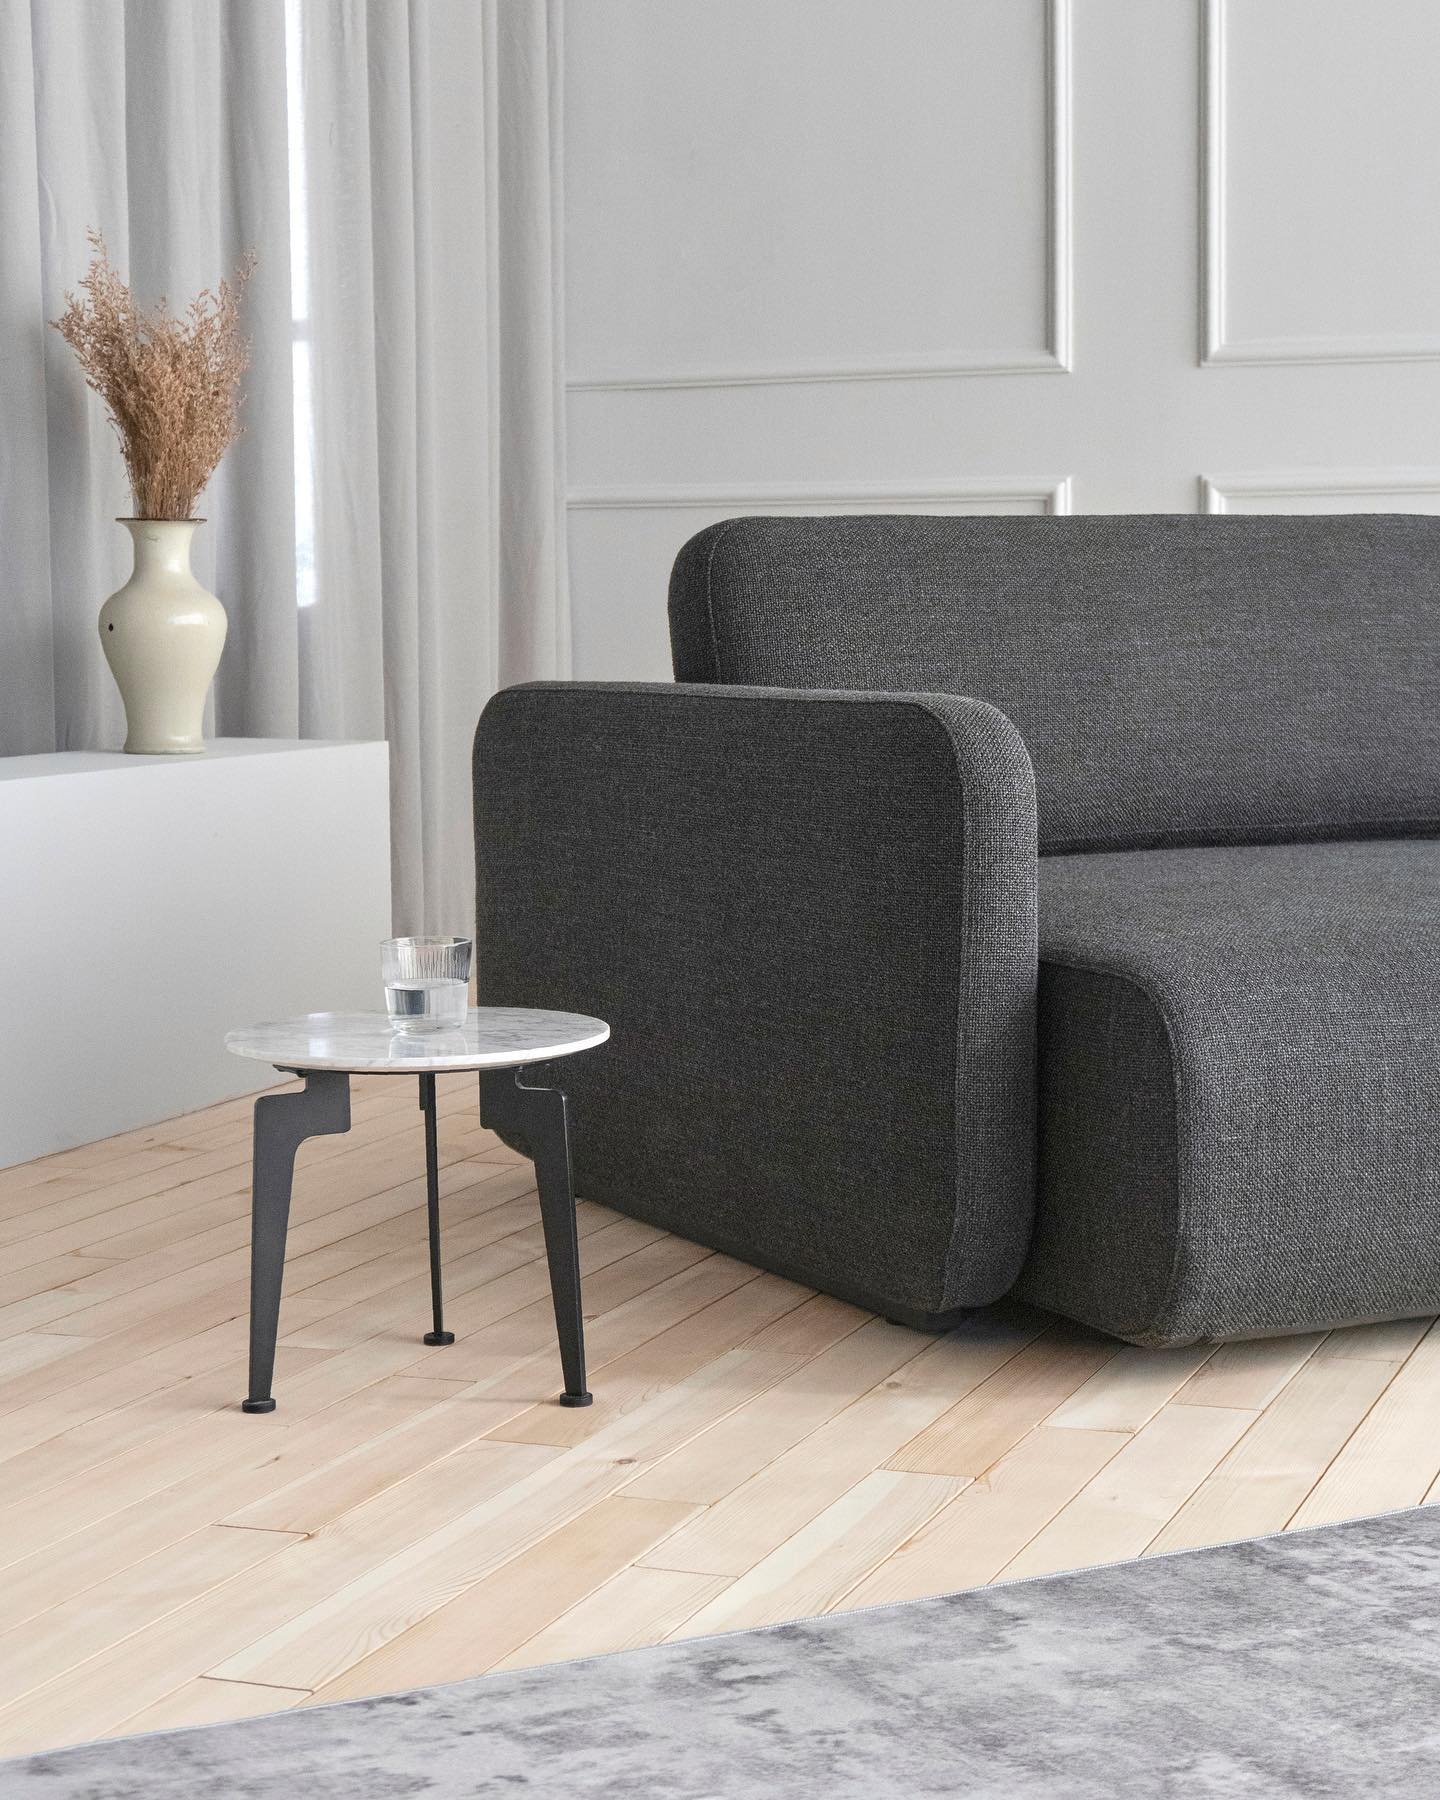 This is Vogan. 
Vogan is not only a sofa. Vogan is multifunctional and is a solution to a problem many experience - Lack of space in their home. The two seats can be adjusted to suit your individual idea of comfort and when both seats are fully exten